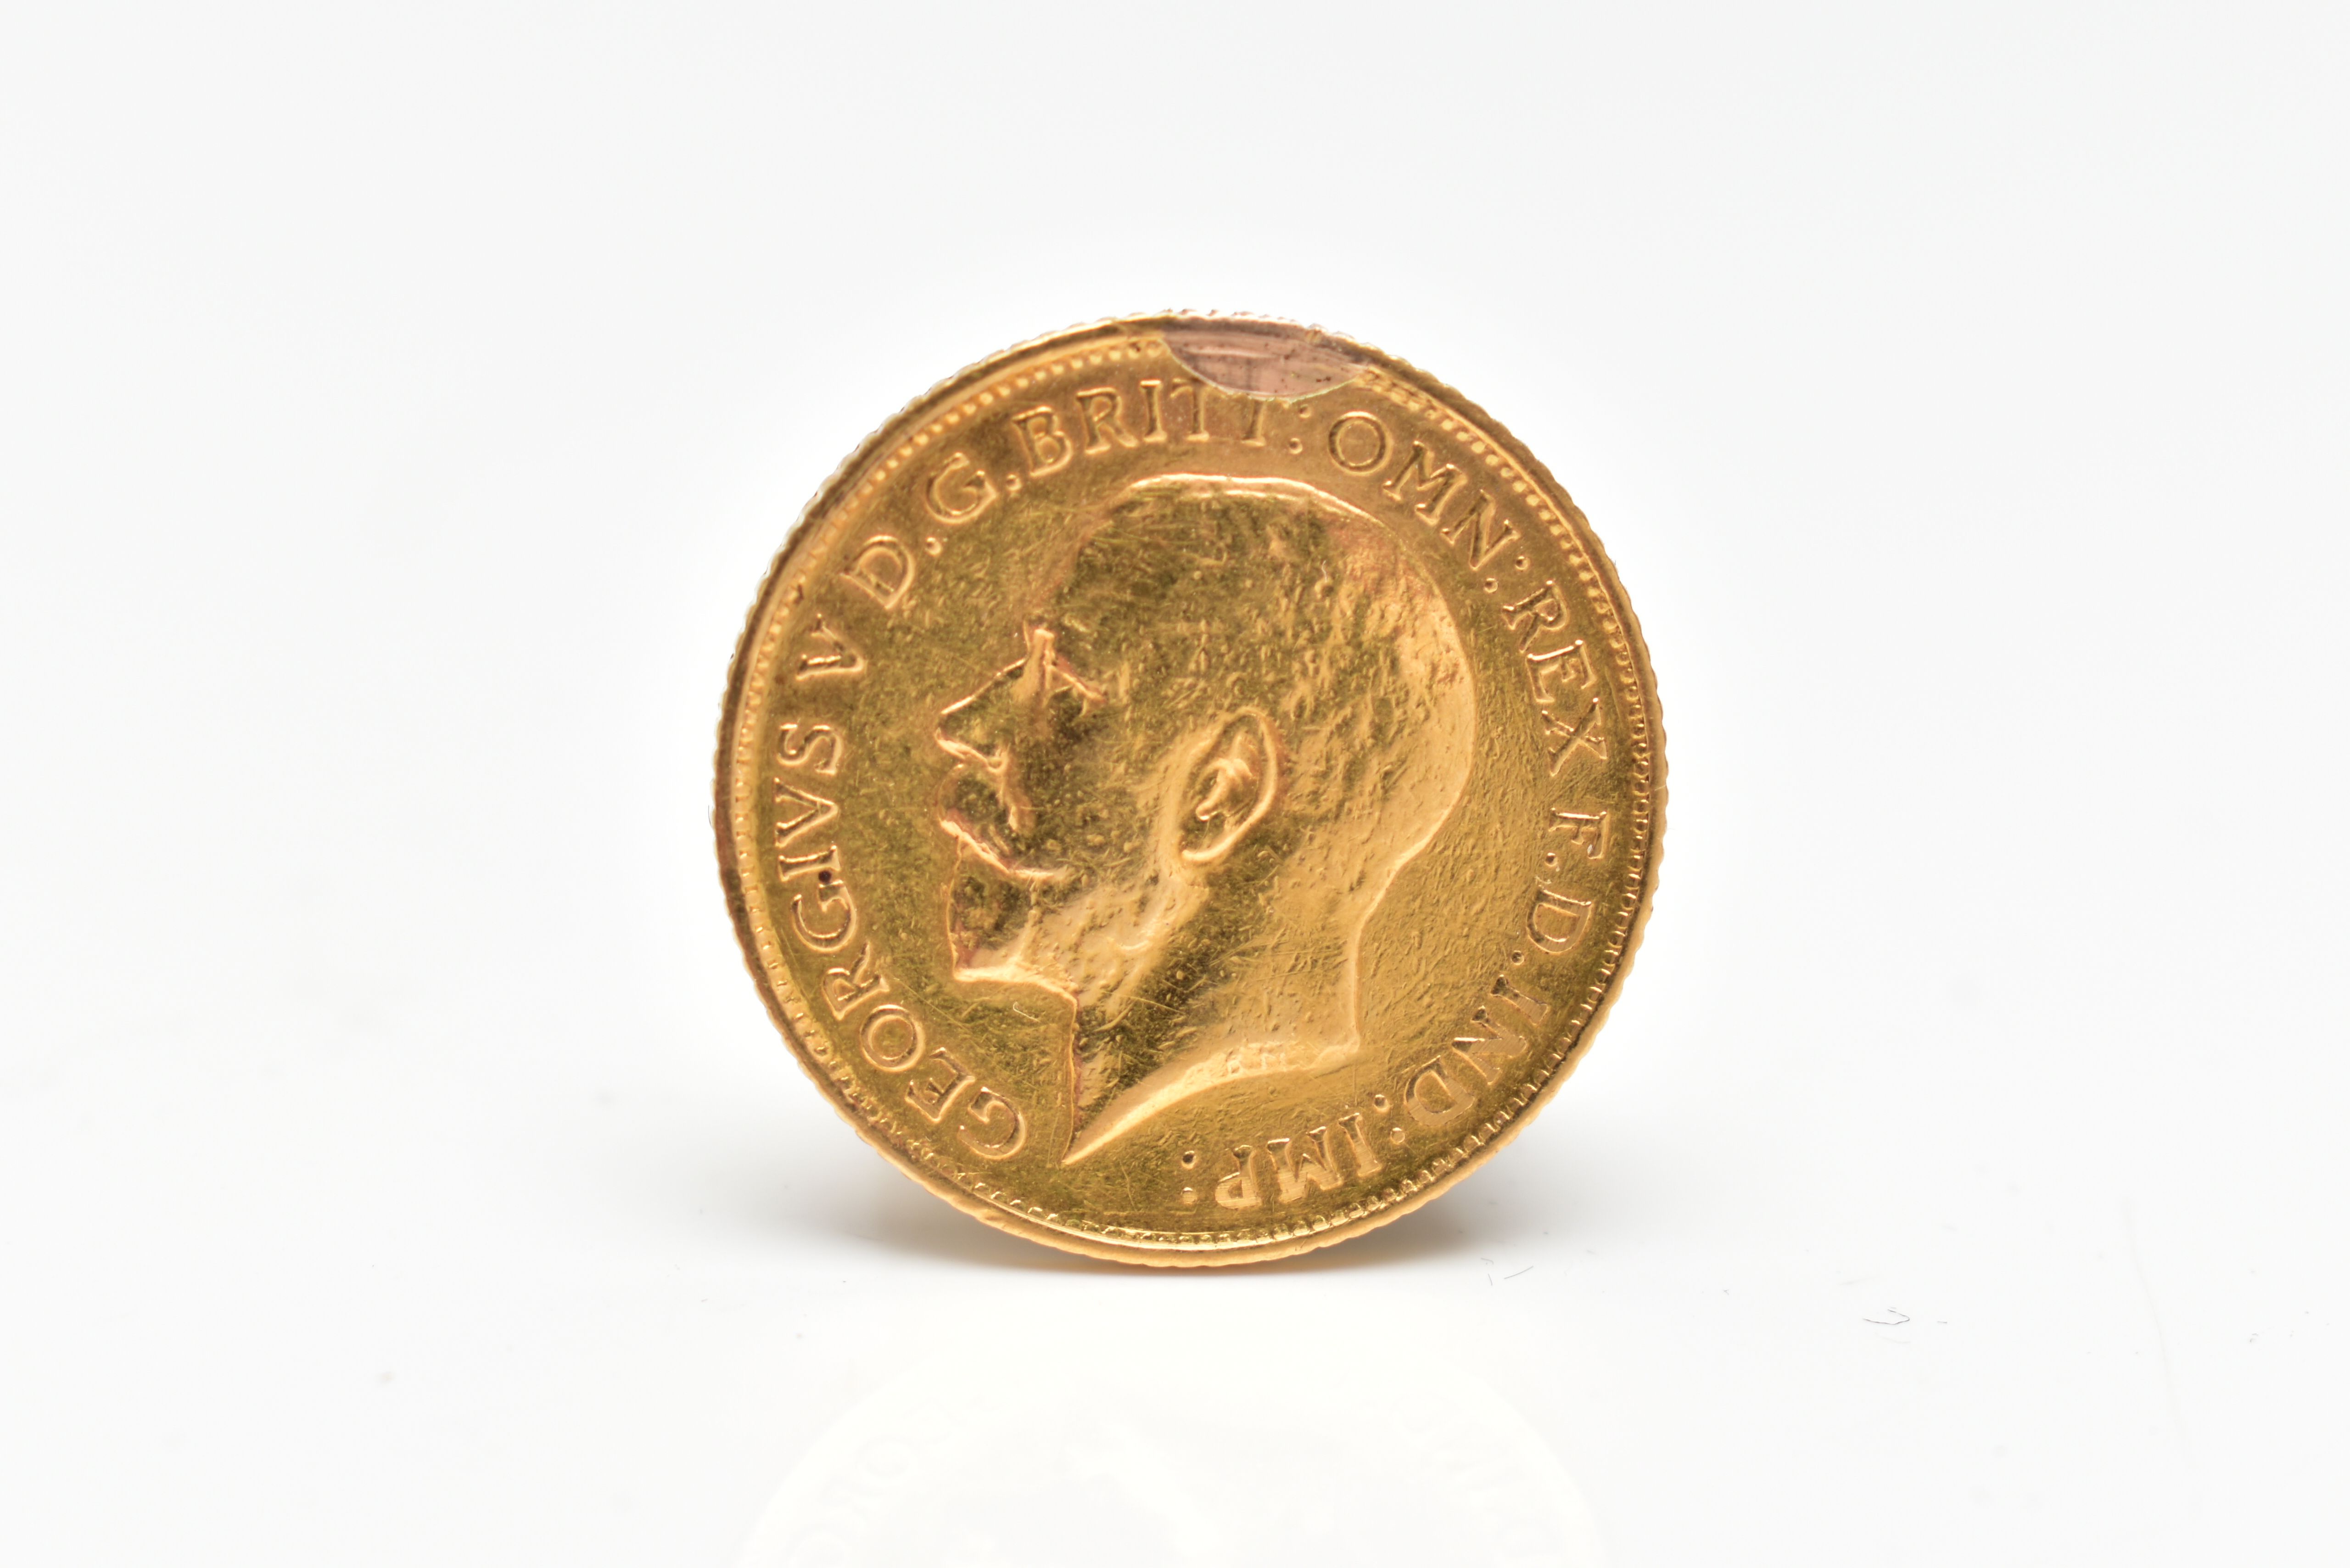 A GEORGE V HALF SOVEREIGN COIN, obverse depicting George V, reverse displaying George and the - Image 2 of 2